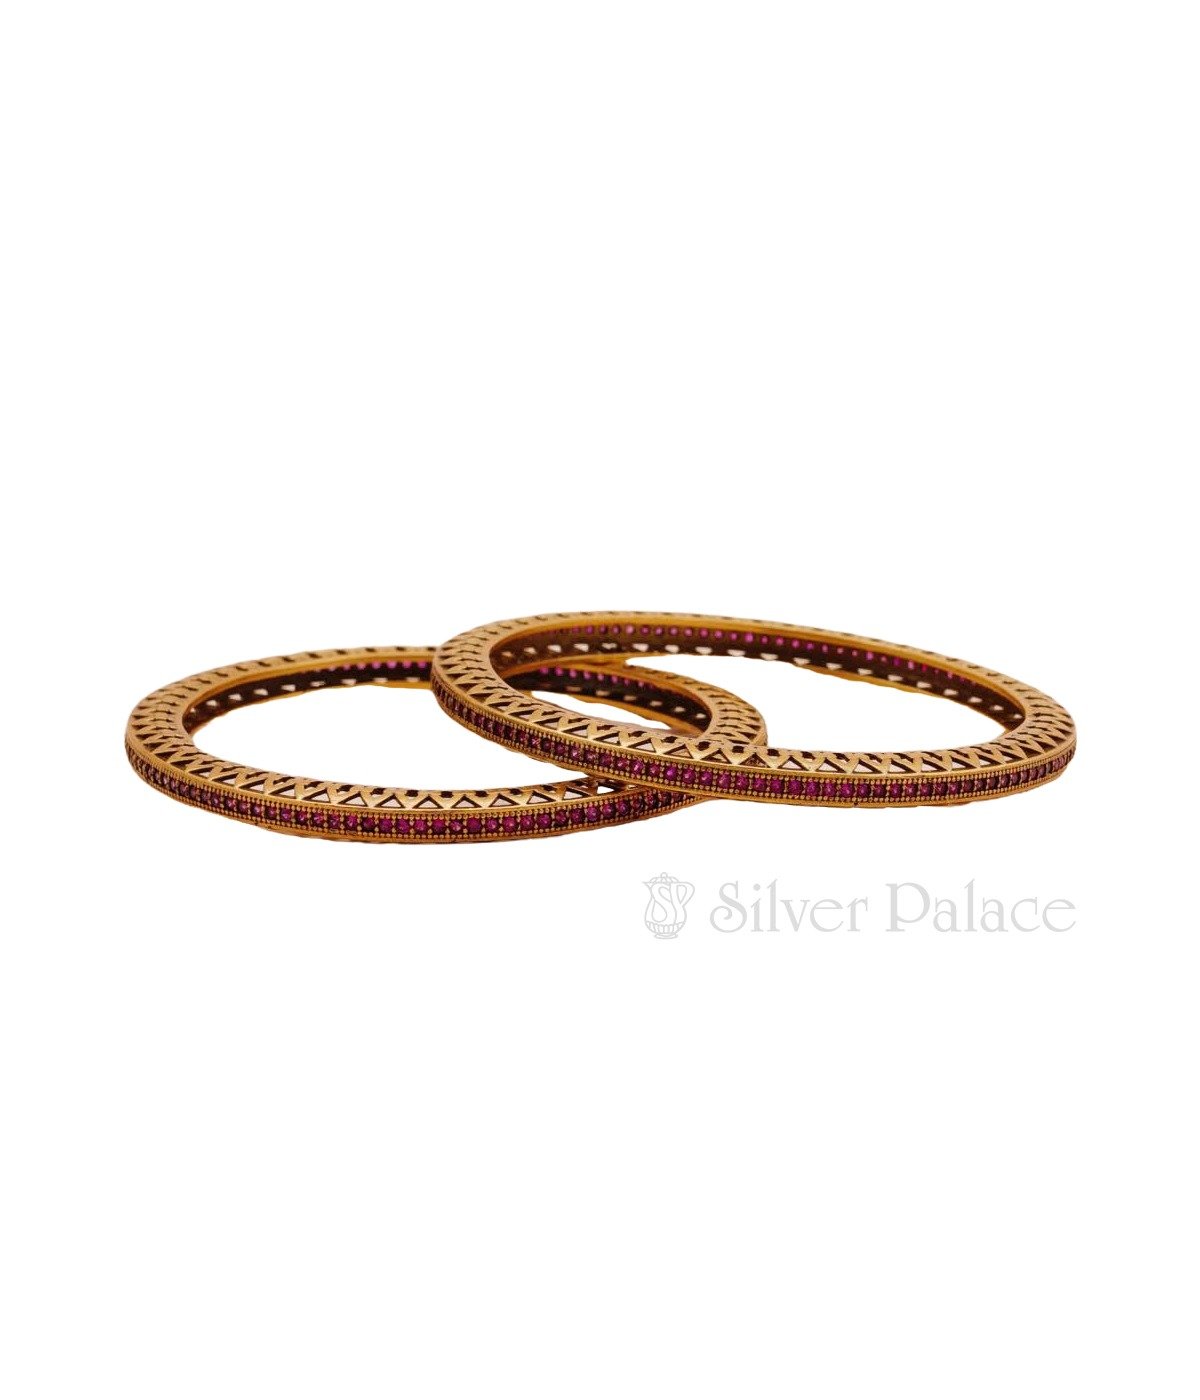 92.5 GOLD POLISHED PINK STONE BANGLE FOR WOMEN